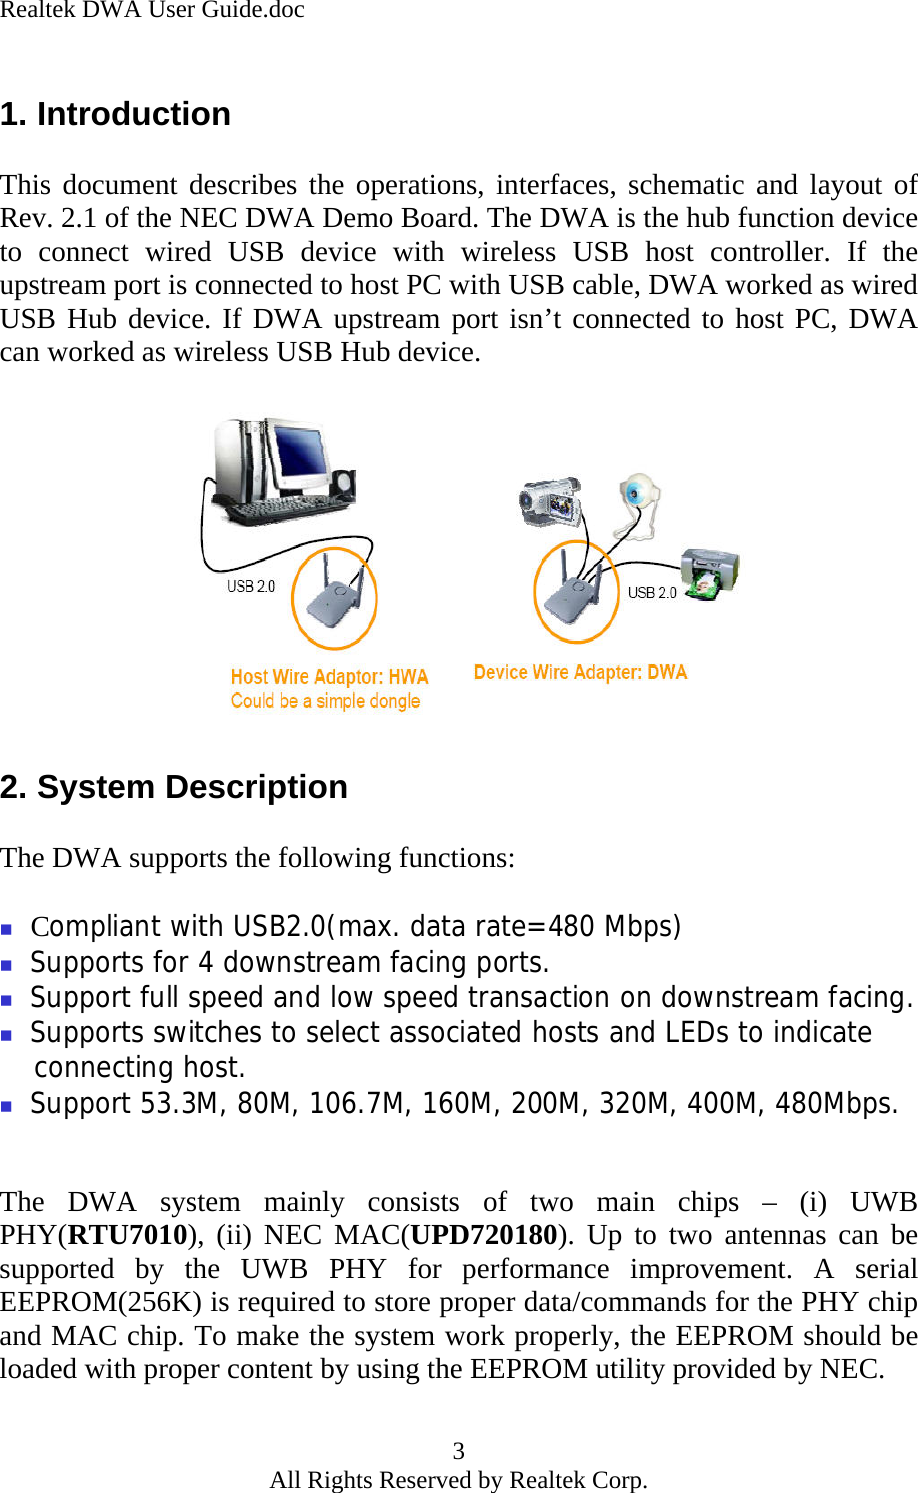 Realtek DWA User Guide.doc 1. Introduction  This document describes the operations, interfaces, schematic and layout of Rev. 2.1 of the NEC DWA Demo Board. The DWA is the hub function device to connect wired USB device with wireless USB host controller. If the upstream port is connected to host PC with USB cable, DWA worked as wired USB Hub device. If DWA upstream port isn’t connected to host PC, DWA can worked as wireless USB Hub device.              2. System Description  The DWA supports the following functions:   Compliant with USB2.0(max. data rate=480 Mbps)  Supports for 4 downstream facing ports.  Support full speed and low speed transaction on downstream facing.         Supports switches to select associated hosts and LEDs to indicate connecting host.  Support 53.3M, 80M, 106.7M, 160M, 200M, 320M, 400M, 480Mbps.   The DWA system mainly consists of two main chips – (i) UWB PHY(RTU7010), (ii) NEC MAC(UPD720180). Up to two antennas can be supported by the UWB PHY for performance improvement. A serial EEPROM(256K) is required to store proper data/commands for the PHY chip and MAC chip. To make the system work properly, the EEPROM should be loaded with proper content by using the EEPROM utility provided by NEC.  3 All Rights Reserved by Realtek Corp. 